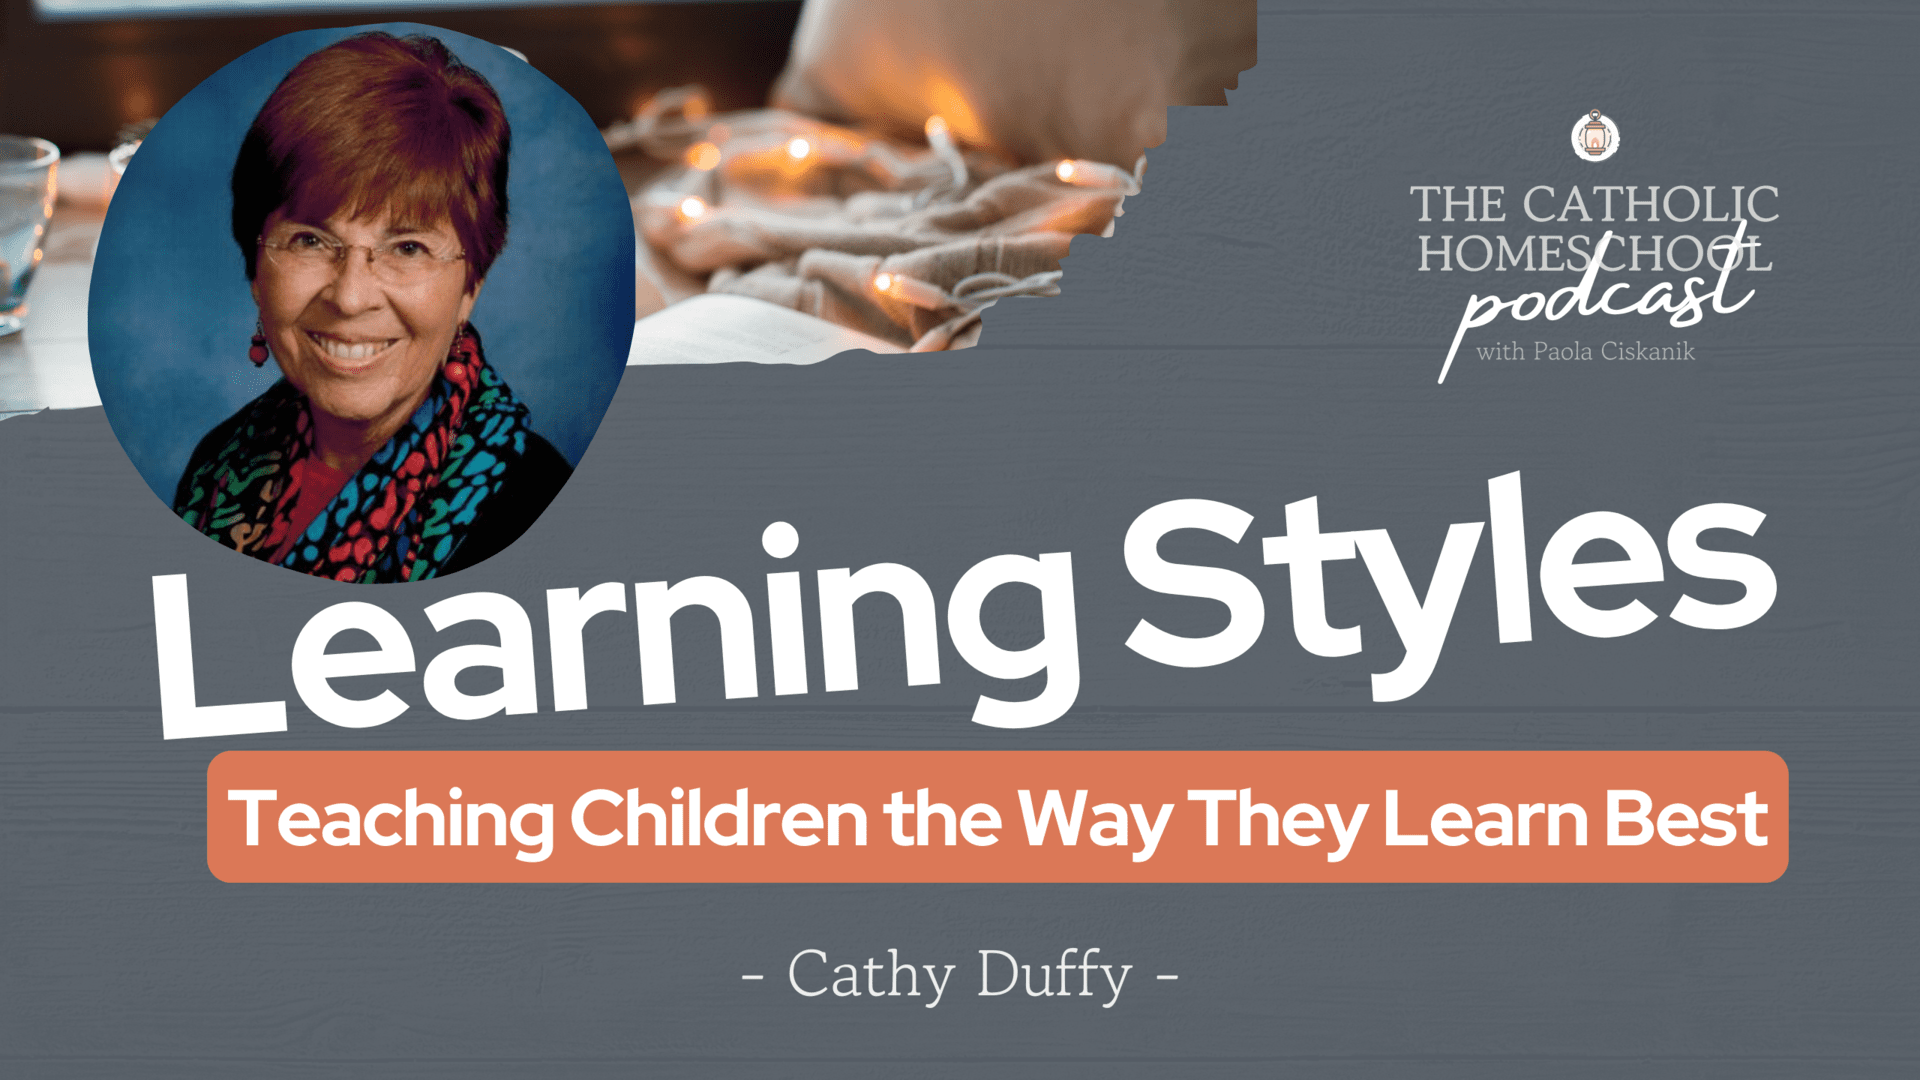 Cathy Duffy | Learning Styles: Teaching Children the Way They Learn Best | The Catholic Homeschool Podcast